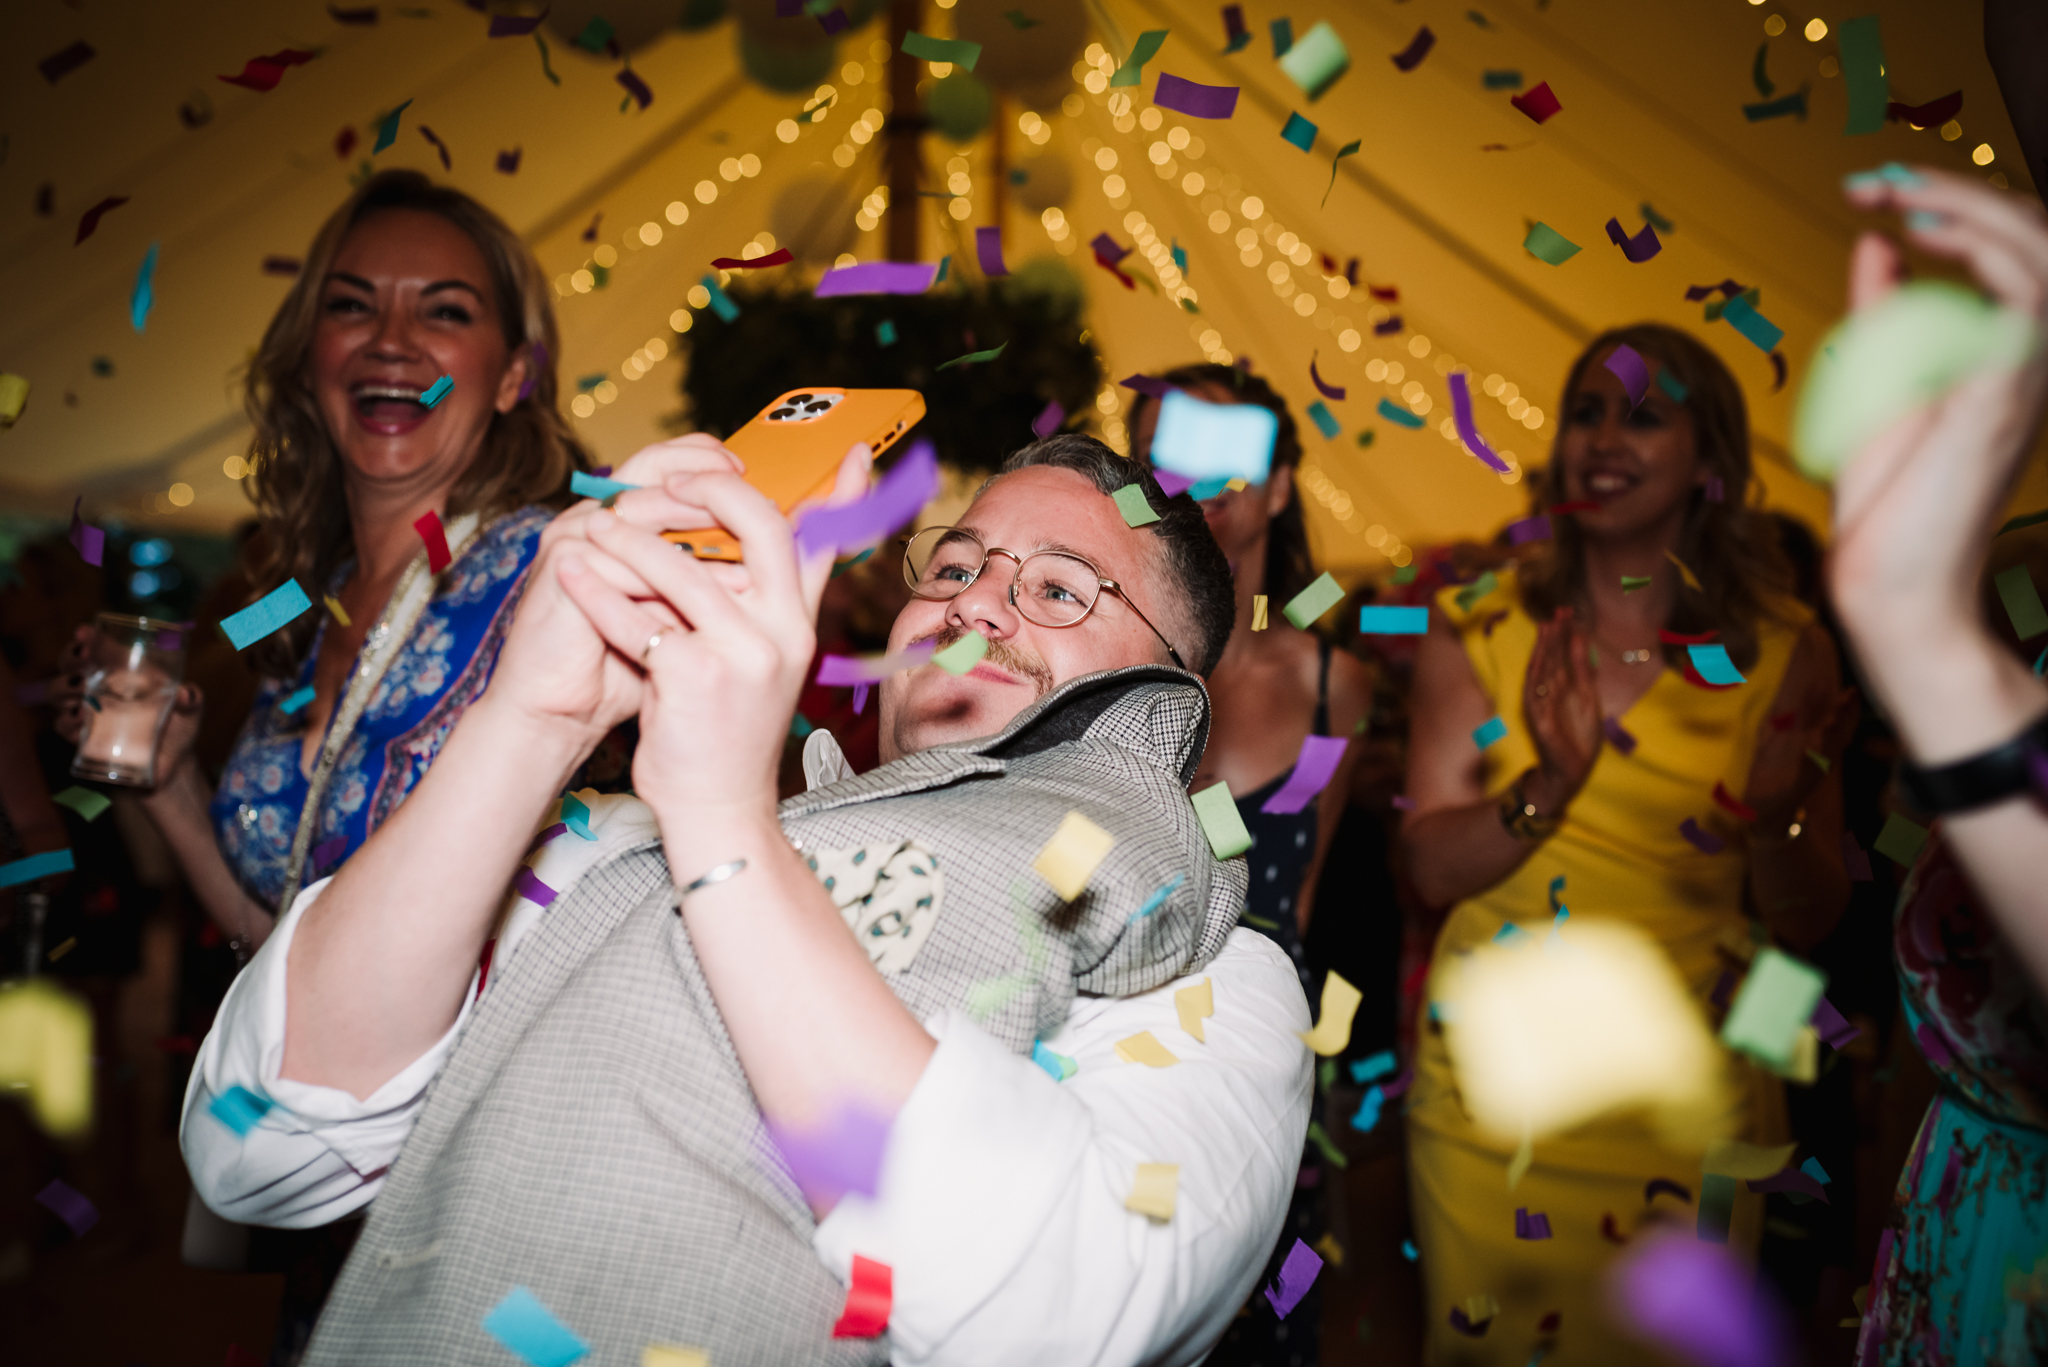 Wedding guests takes a photograph of confetti canon at wedding reception